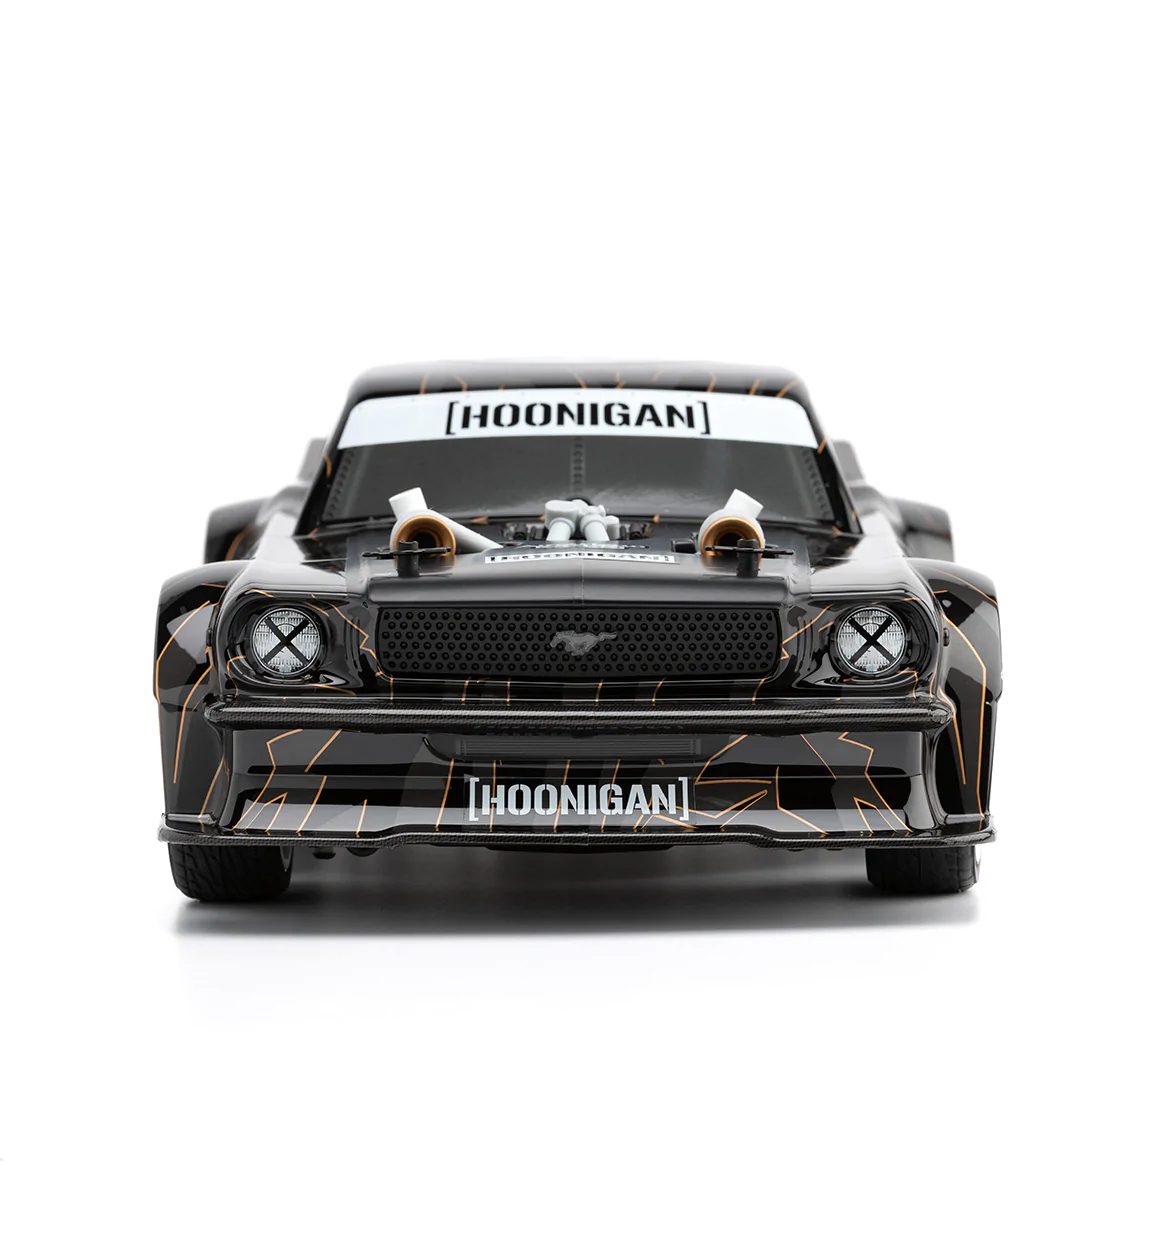 Hoonigan Releases A 1/10th-Scale Hoonicorn V2 4WD RC Car, 43% OFF